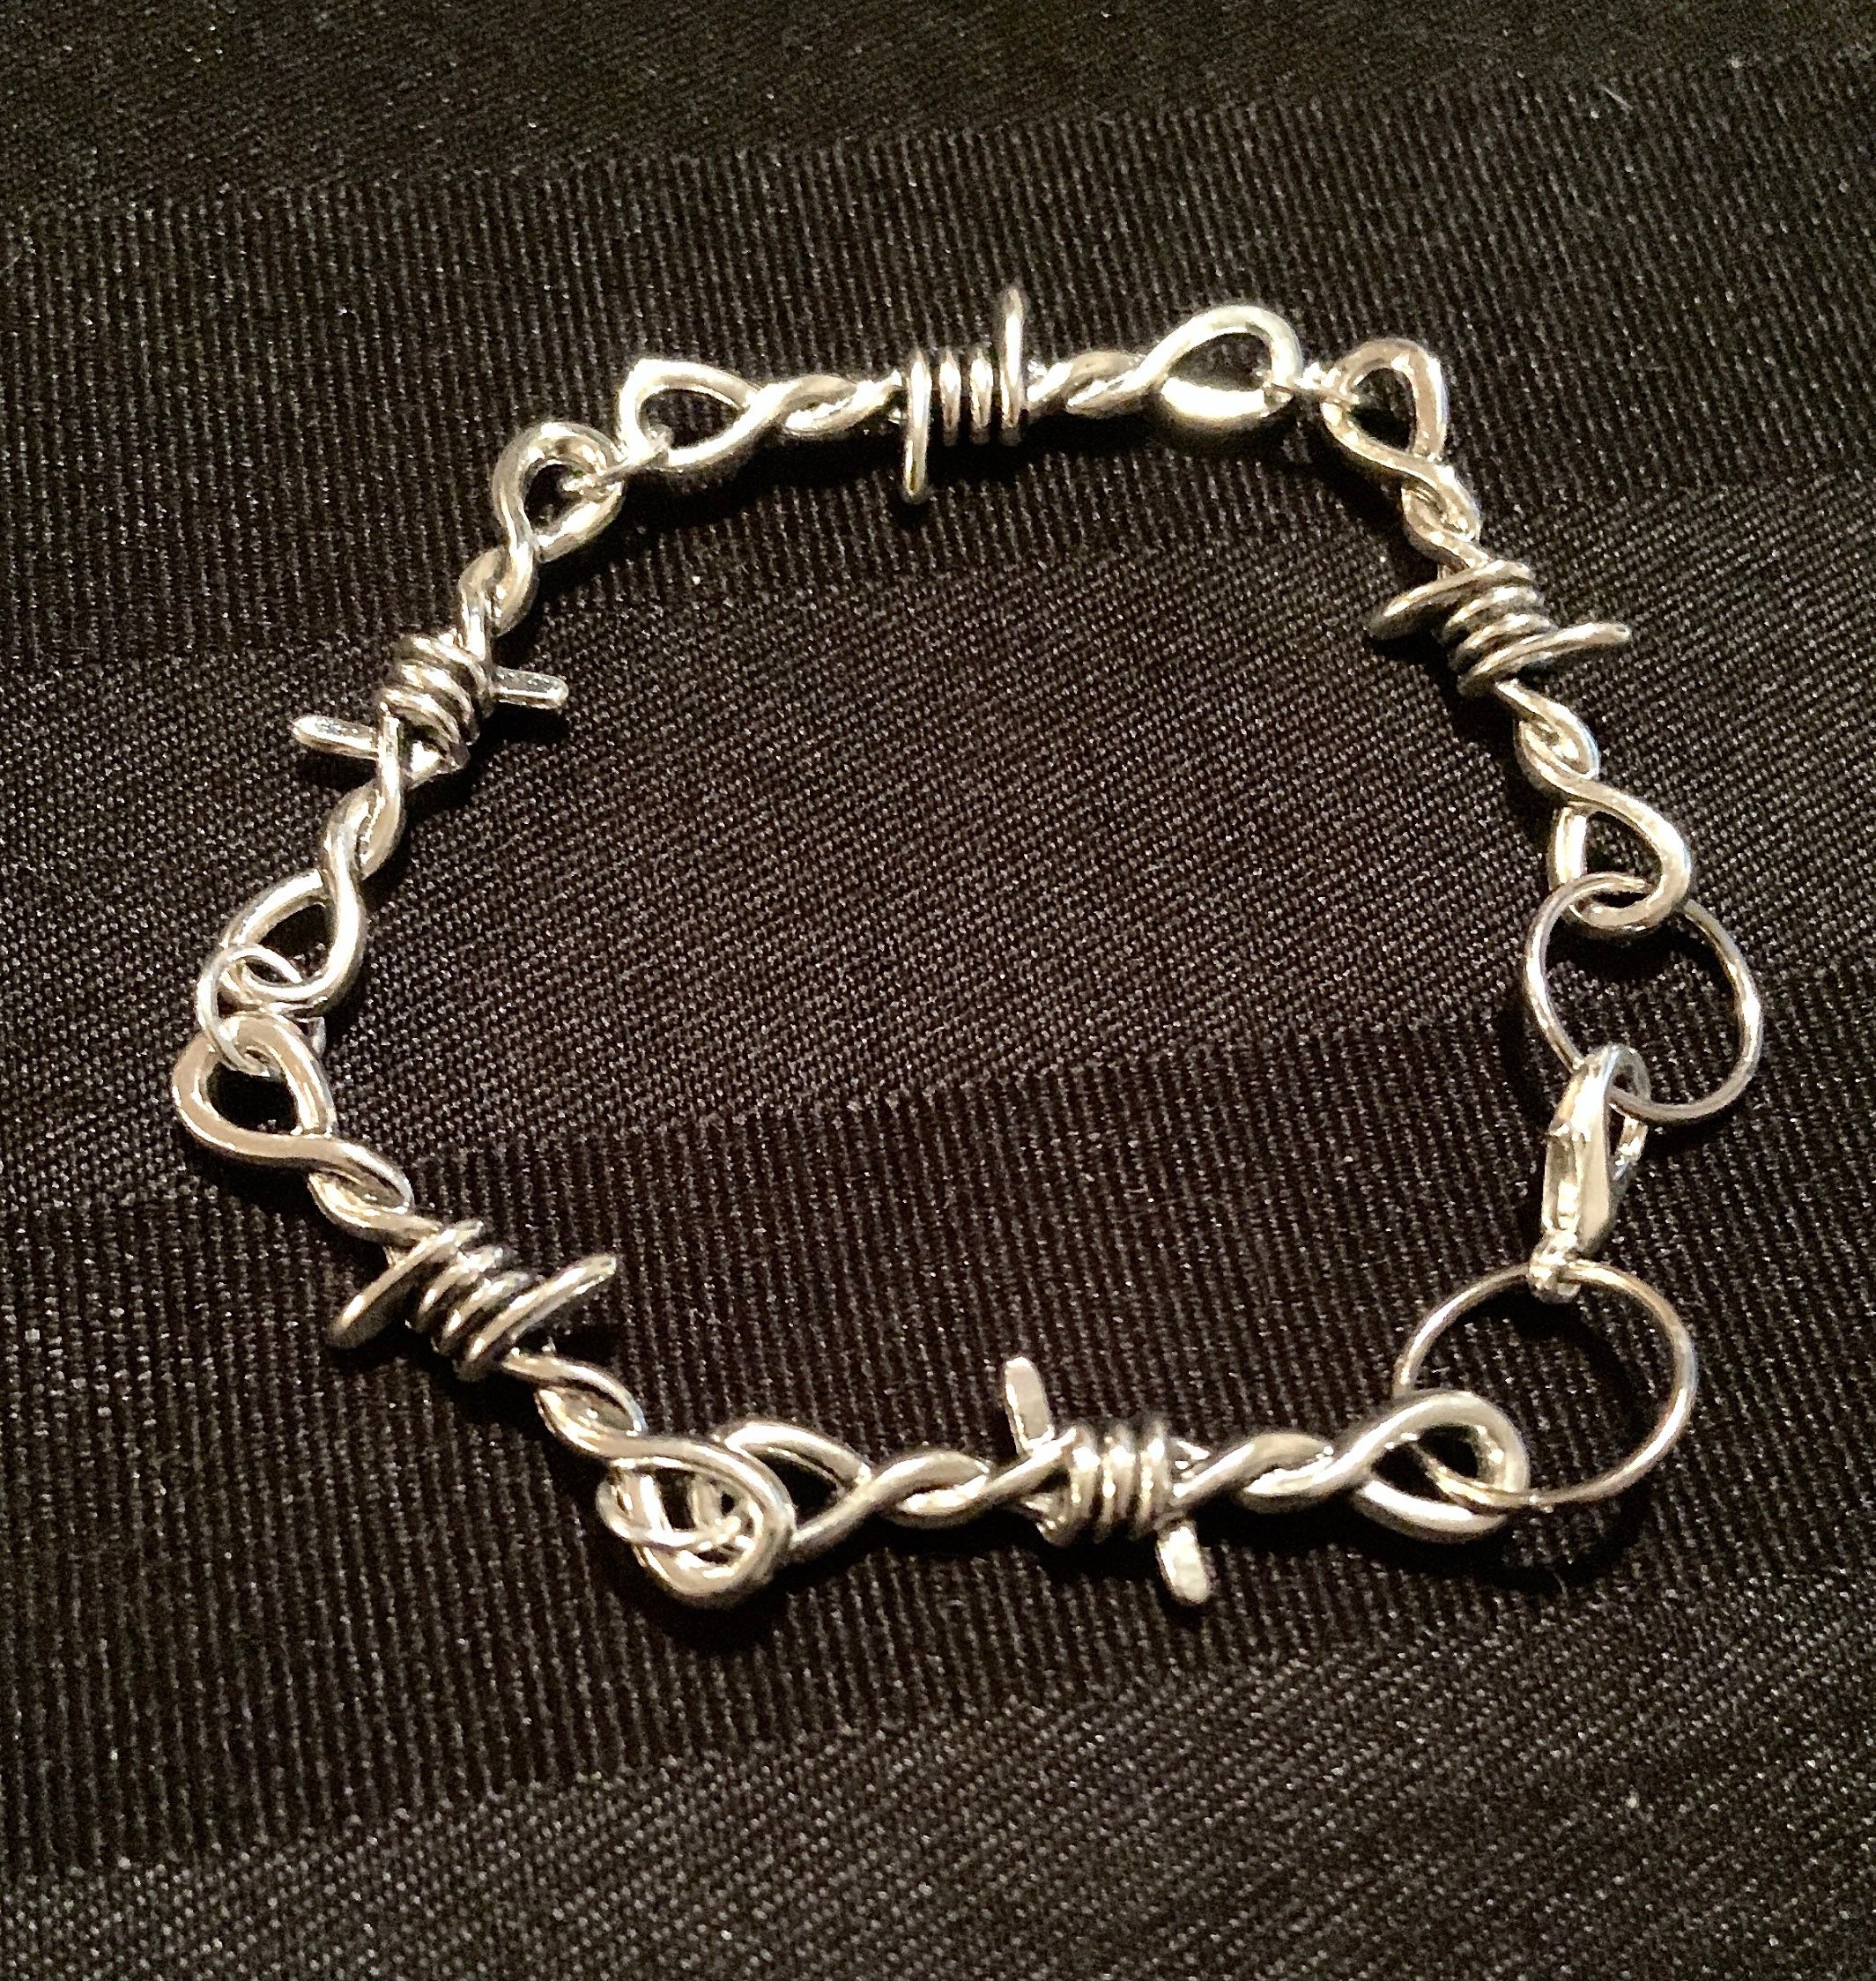 Barbed Wire Bracelet | LOVE2HAVE in the UK!